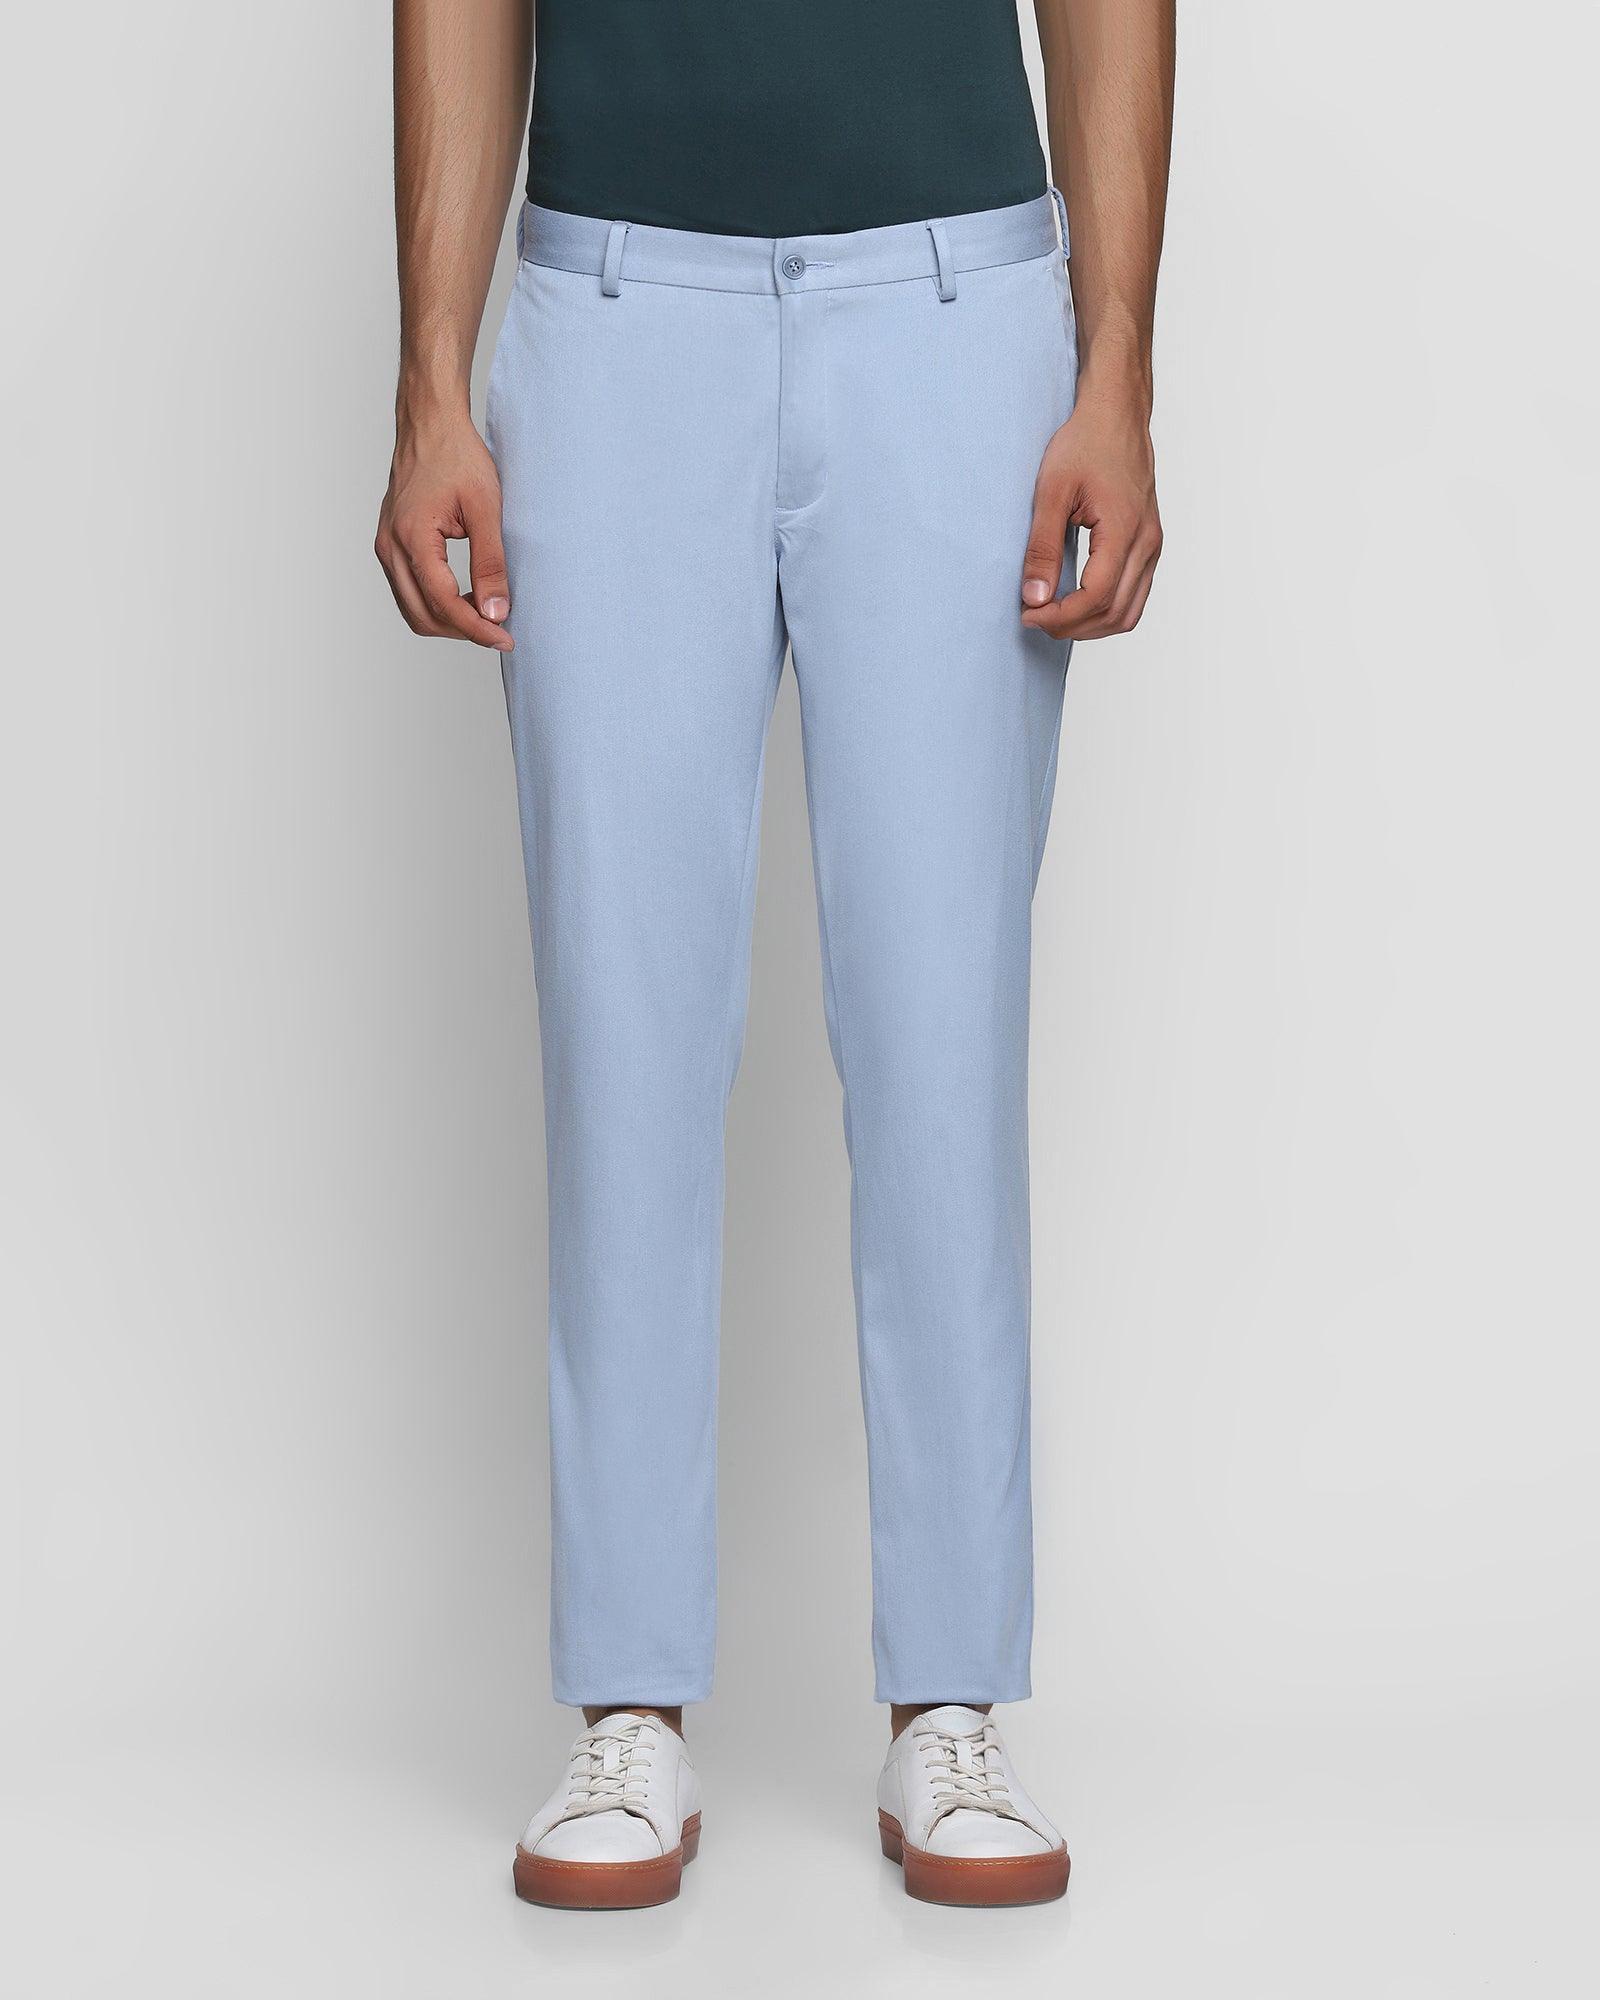 slim-fit-b-91-casual-sky-blue-solid-khakis---aiden